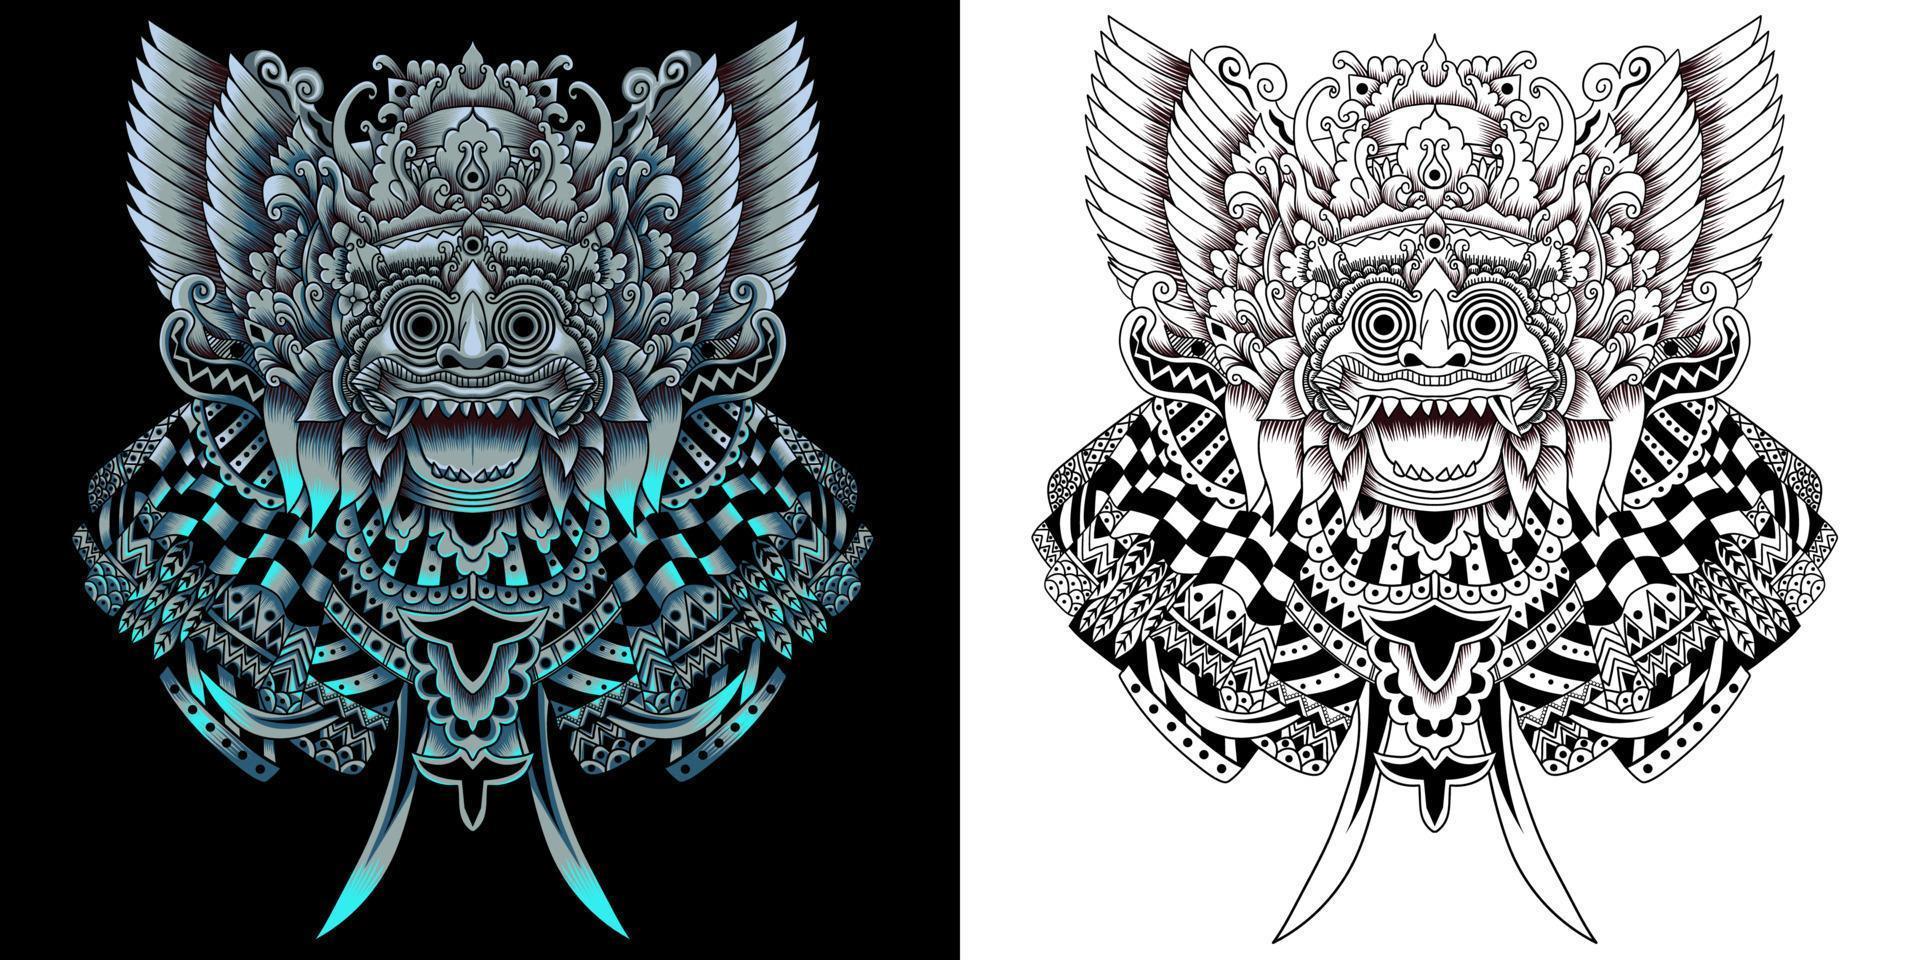 barong balinese mask in neon color style vector